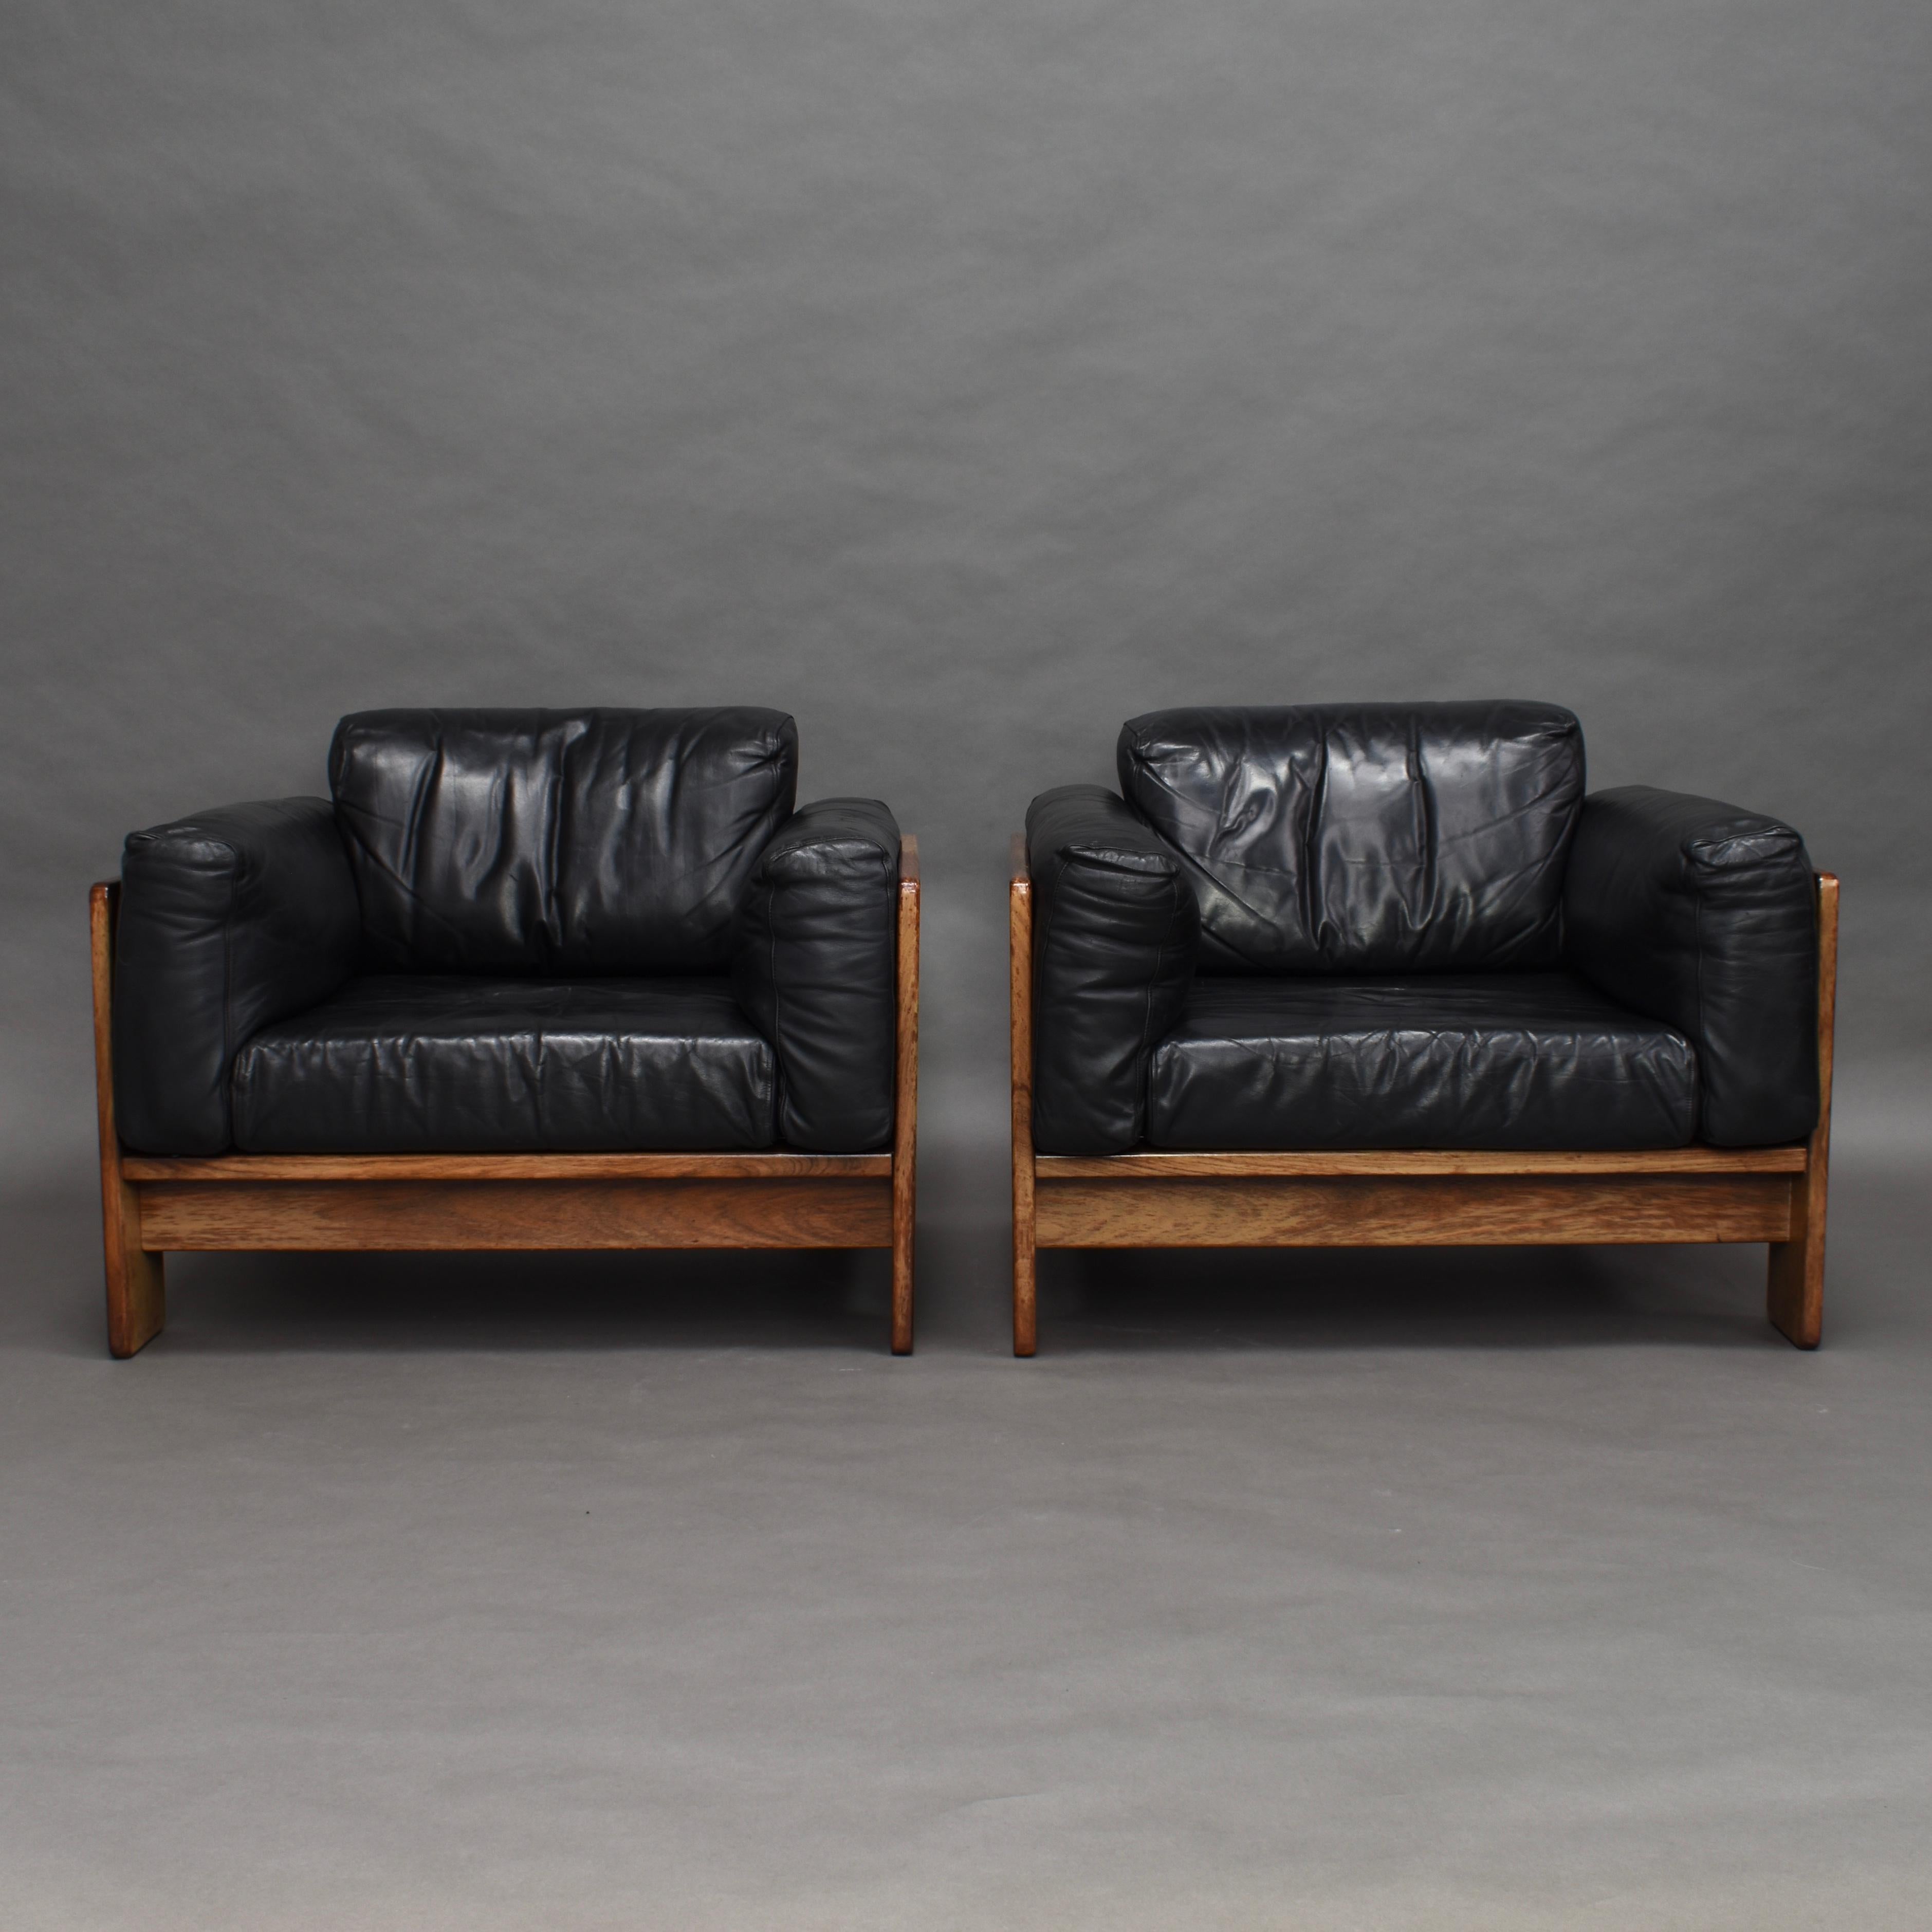 European Scarpa Pair of Bastiano Chairs in Black Leather and Rosewood, Knoll Italy, 1975